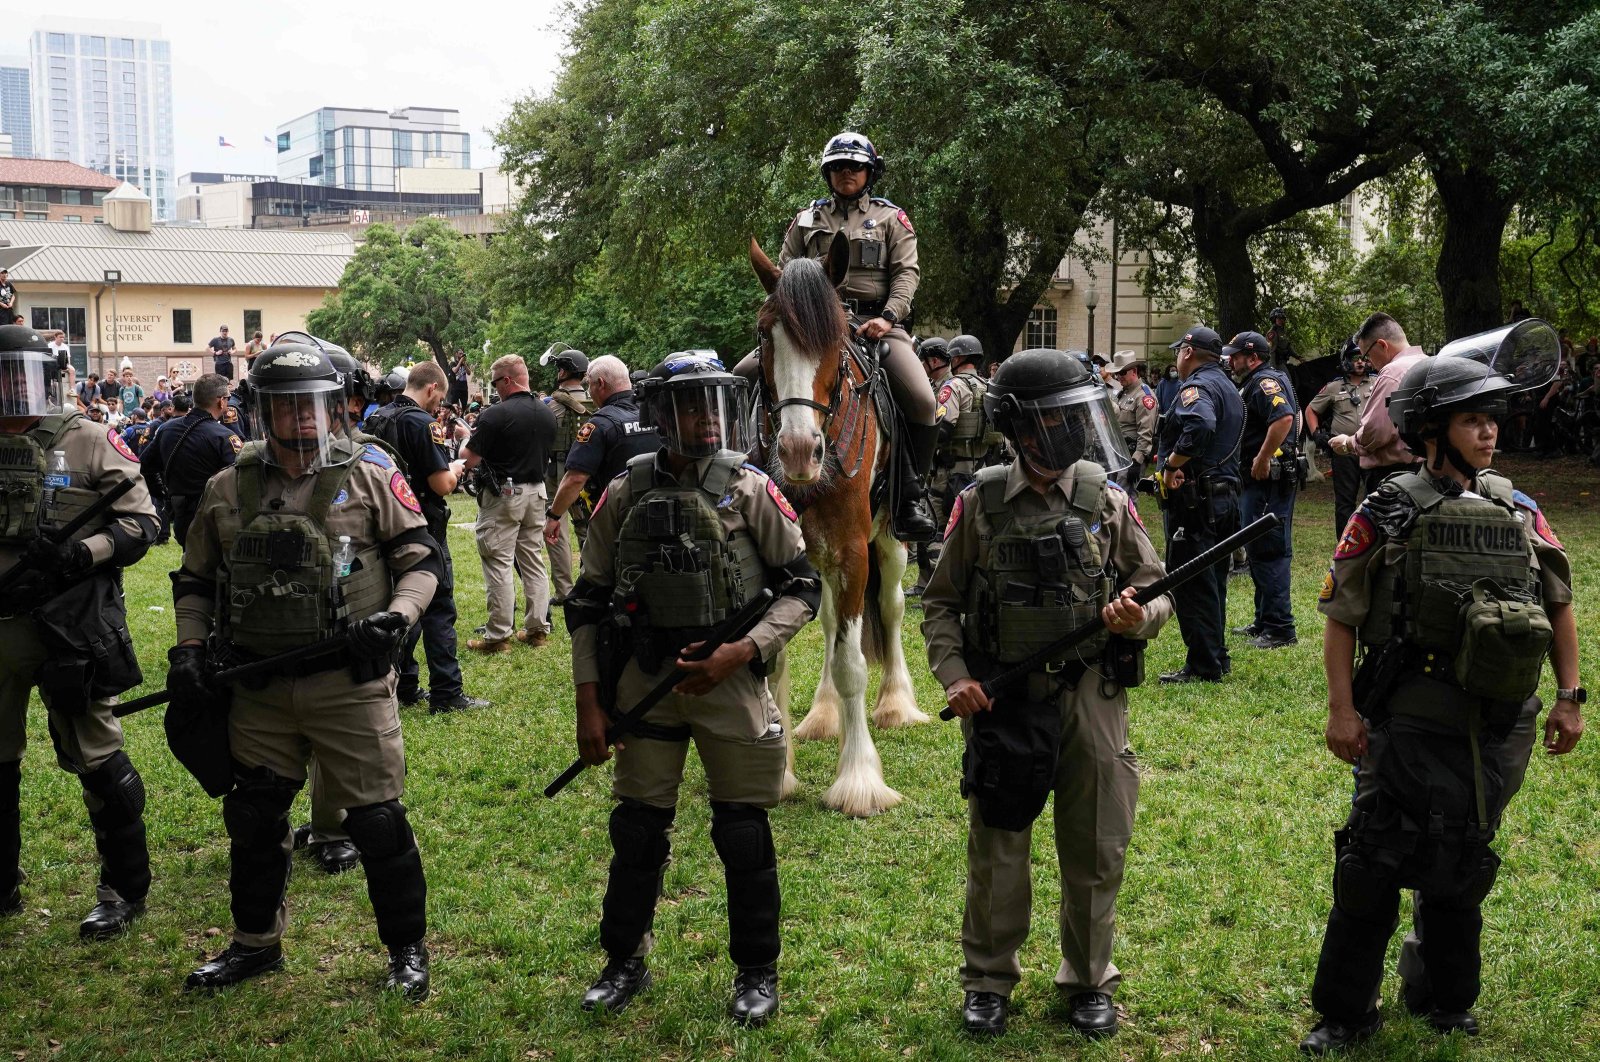 Mounted police crack down on pro-Palestine protesters in Texas